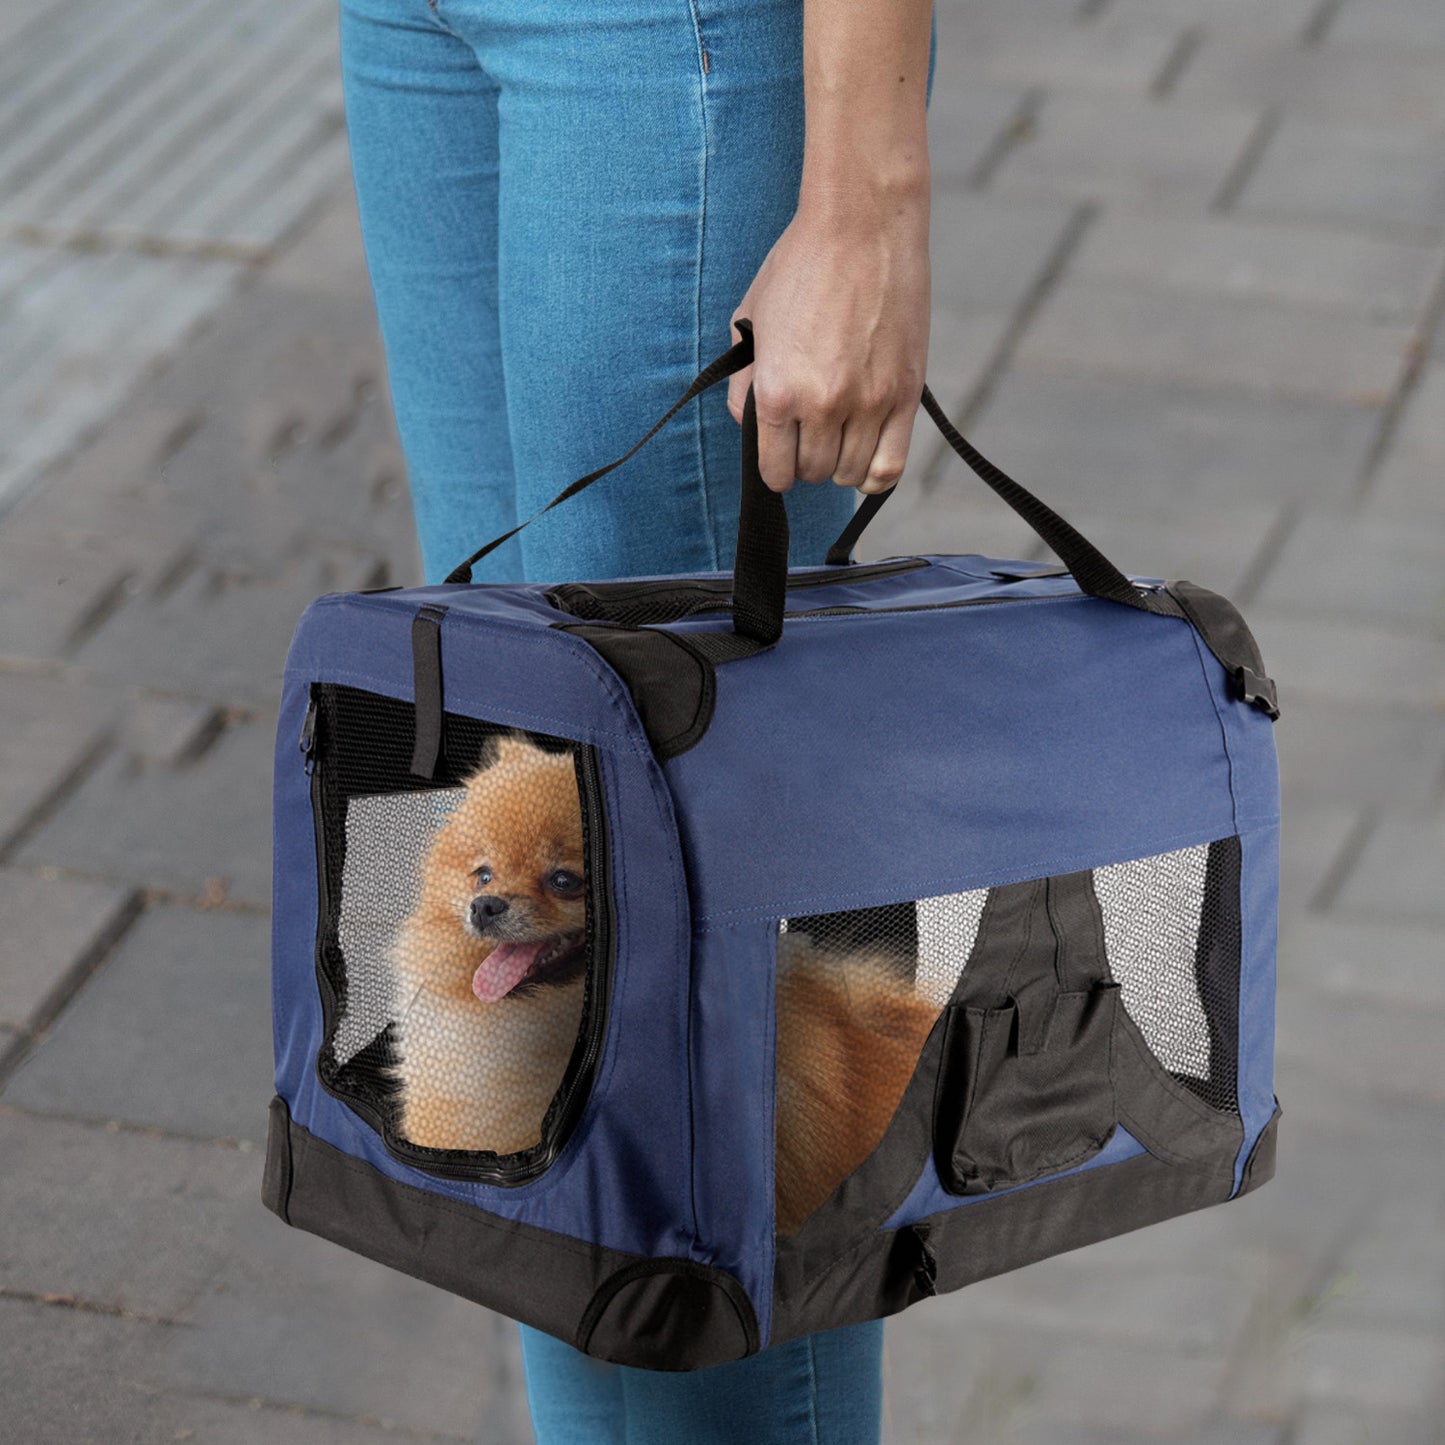 Royale Heavy Duty Soft Collapsible Pet Carrier Travel Friendly Medium